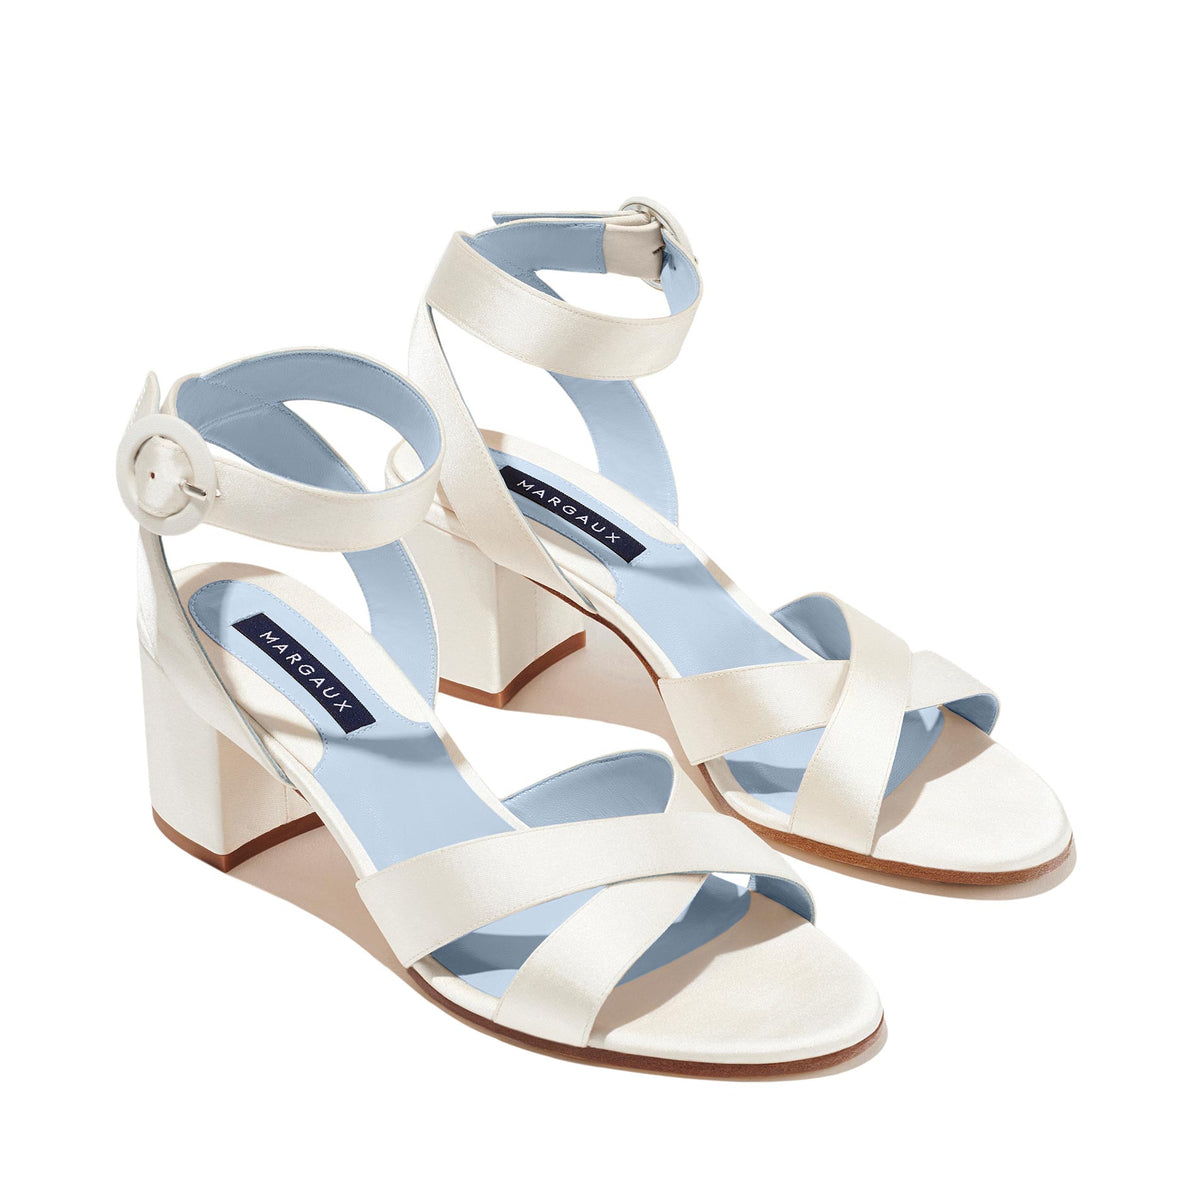 The City Sandal in Ivory Satin